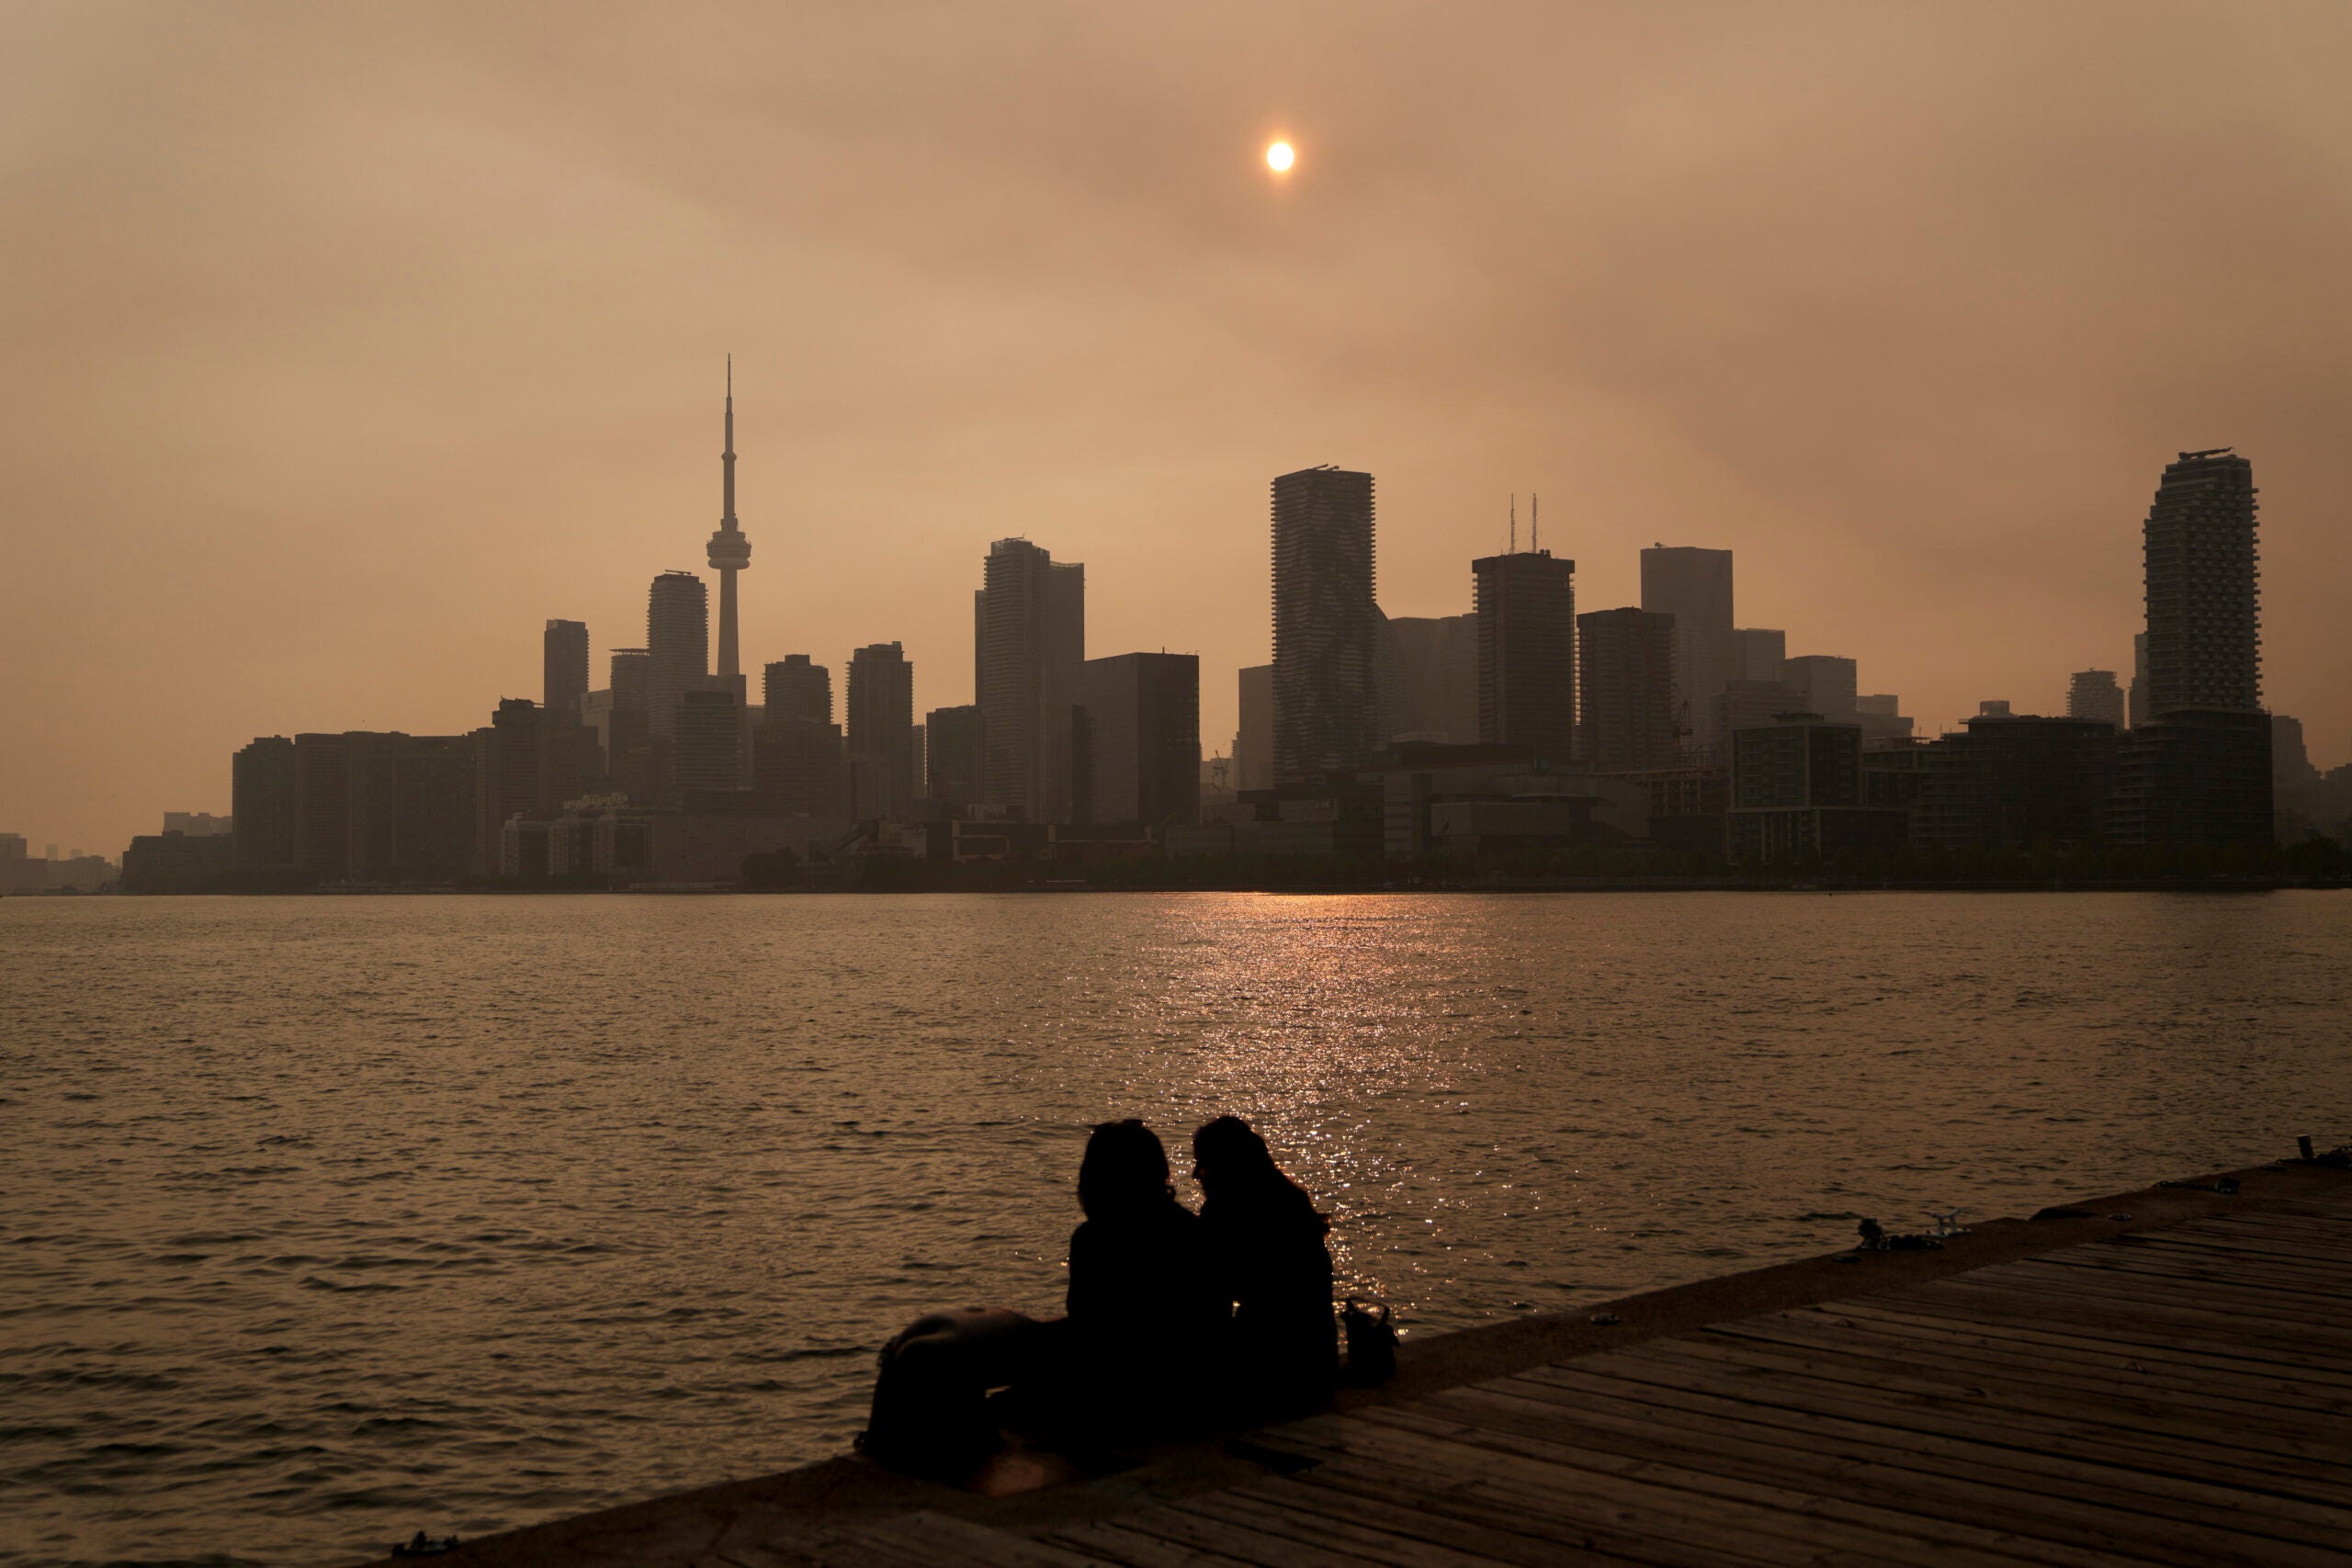 People watch the sunset as the smoke from wildfires is visible in Toronto.